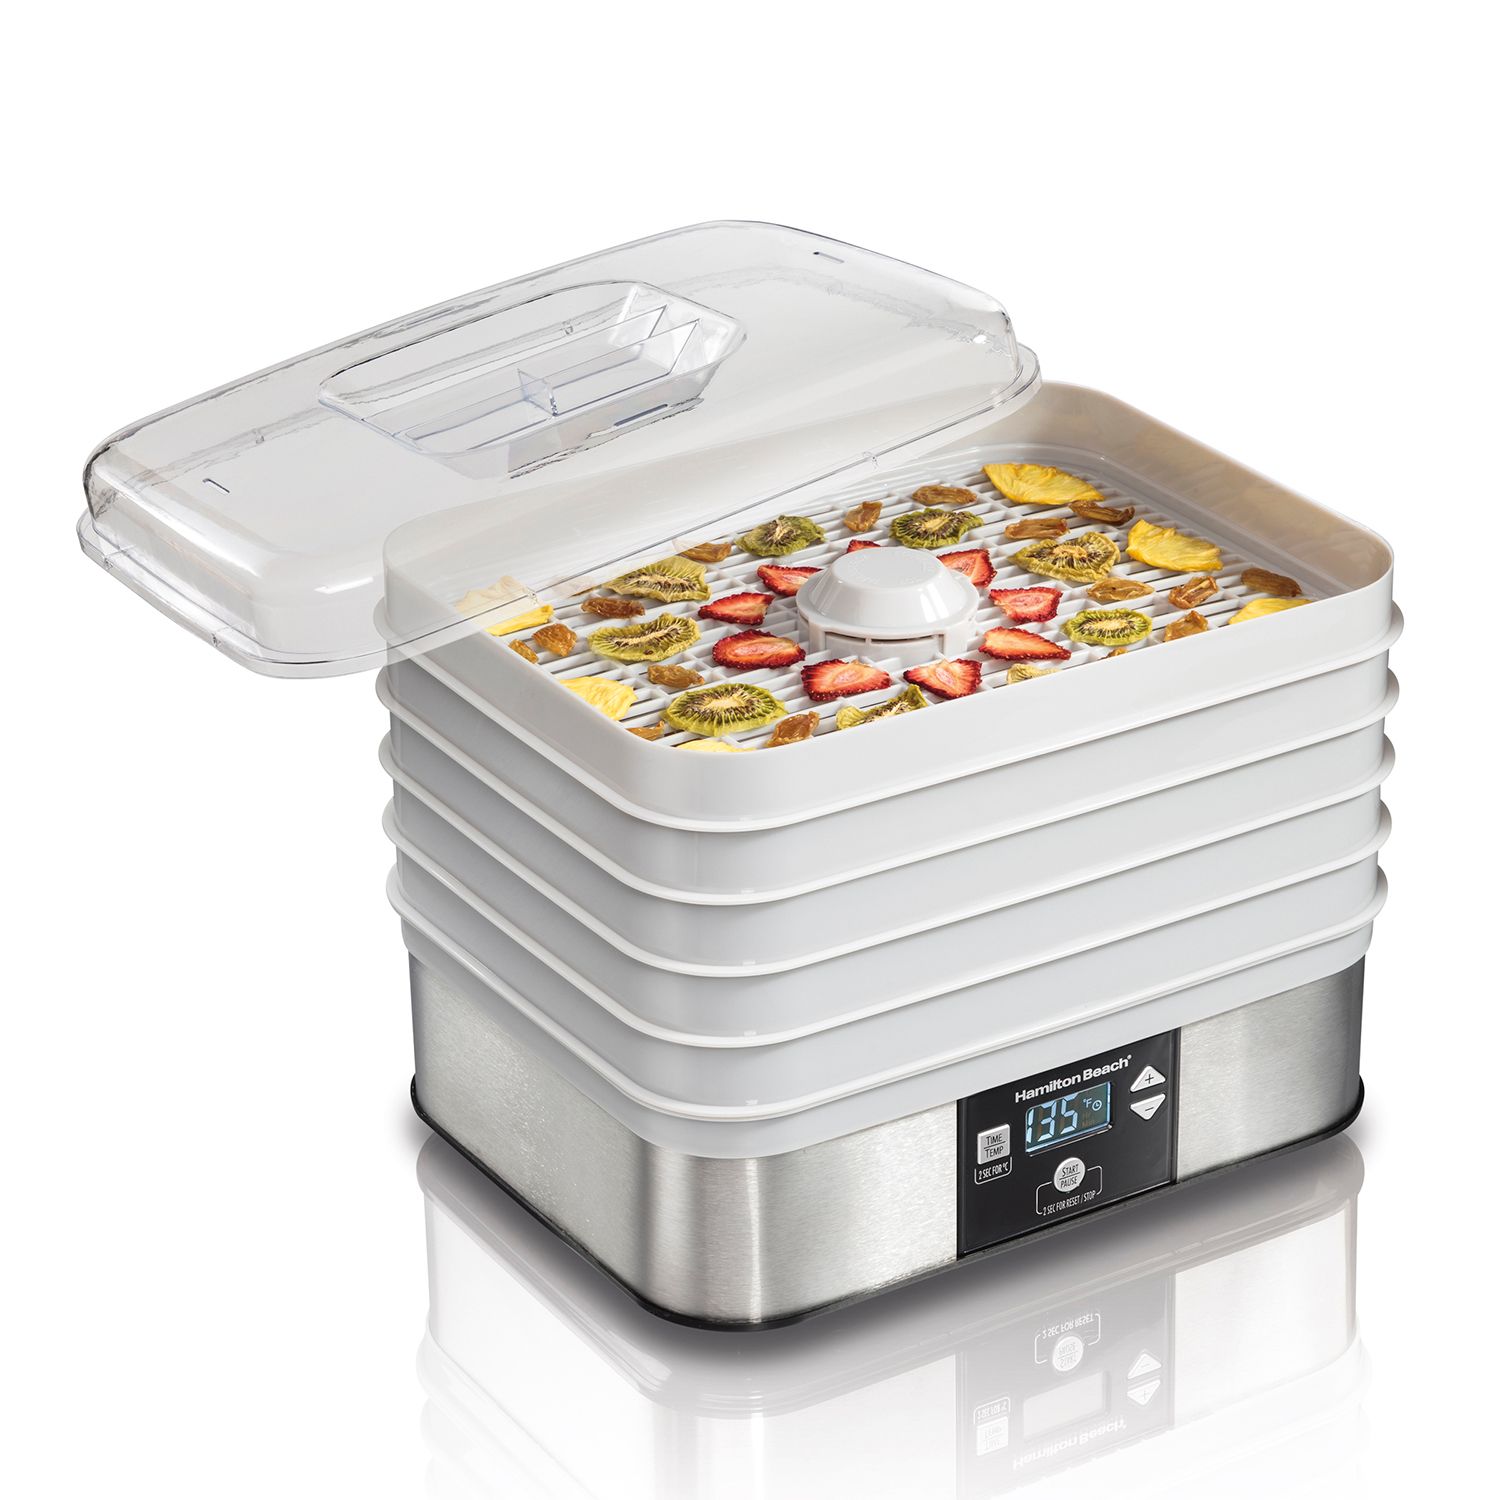 Elite Gourmet Food Dehydrator with Adjustable Temperature Dial and